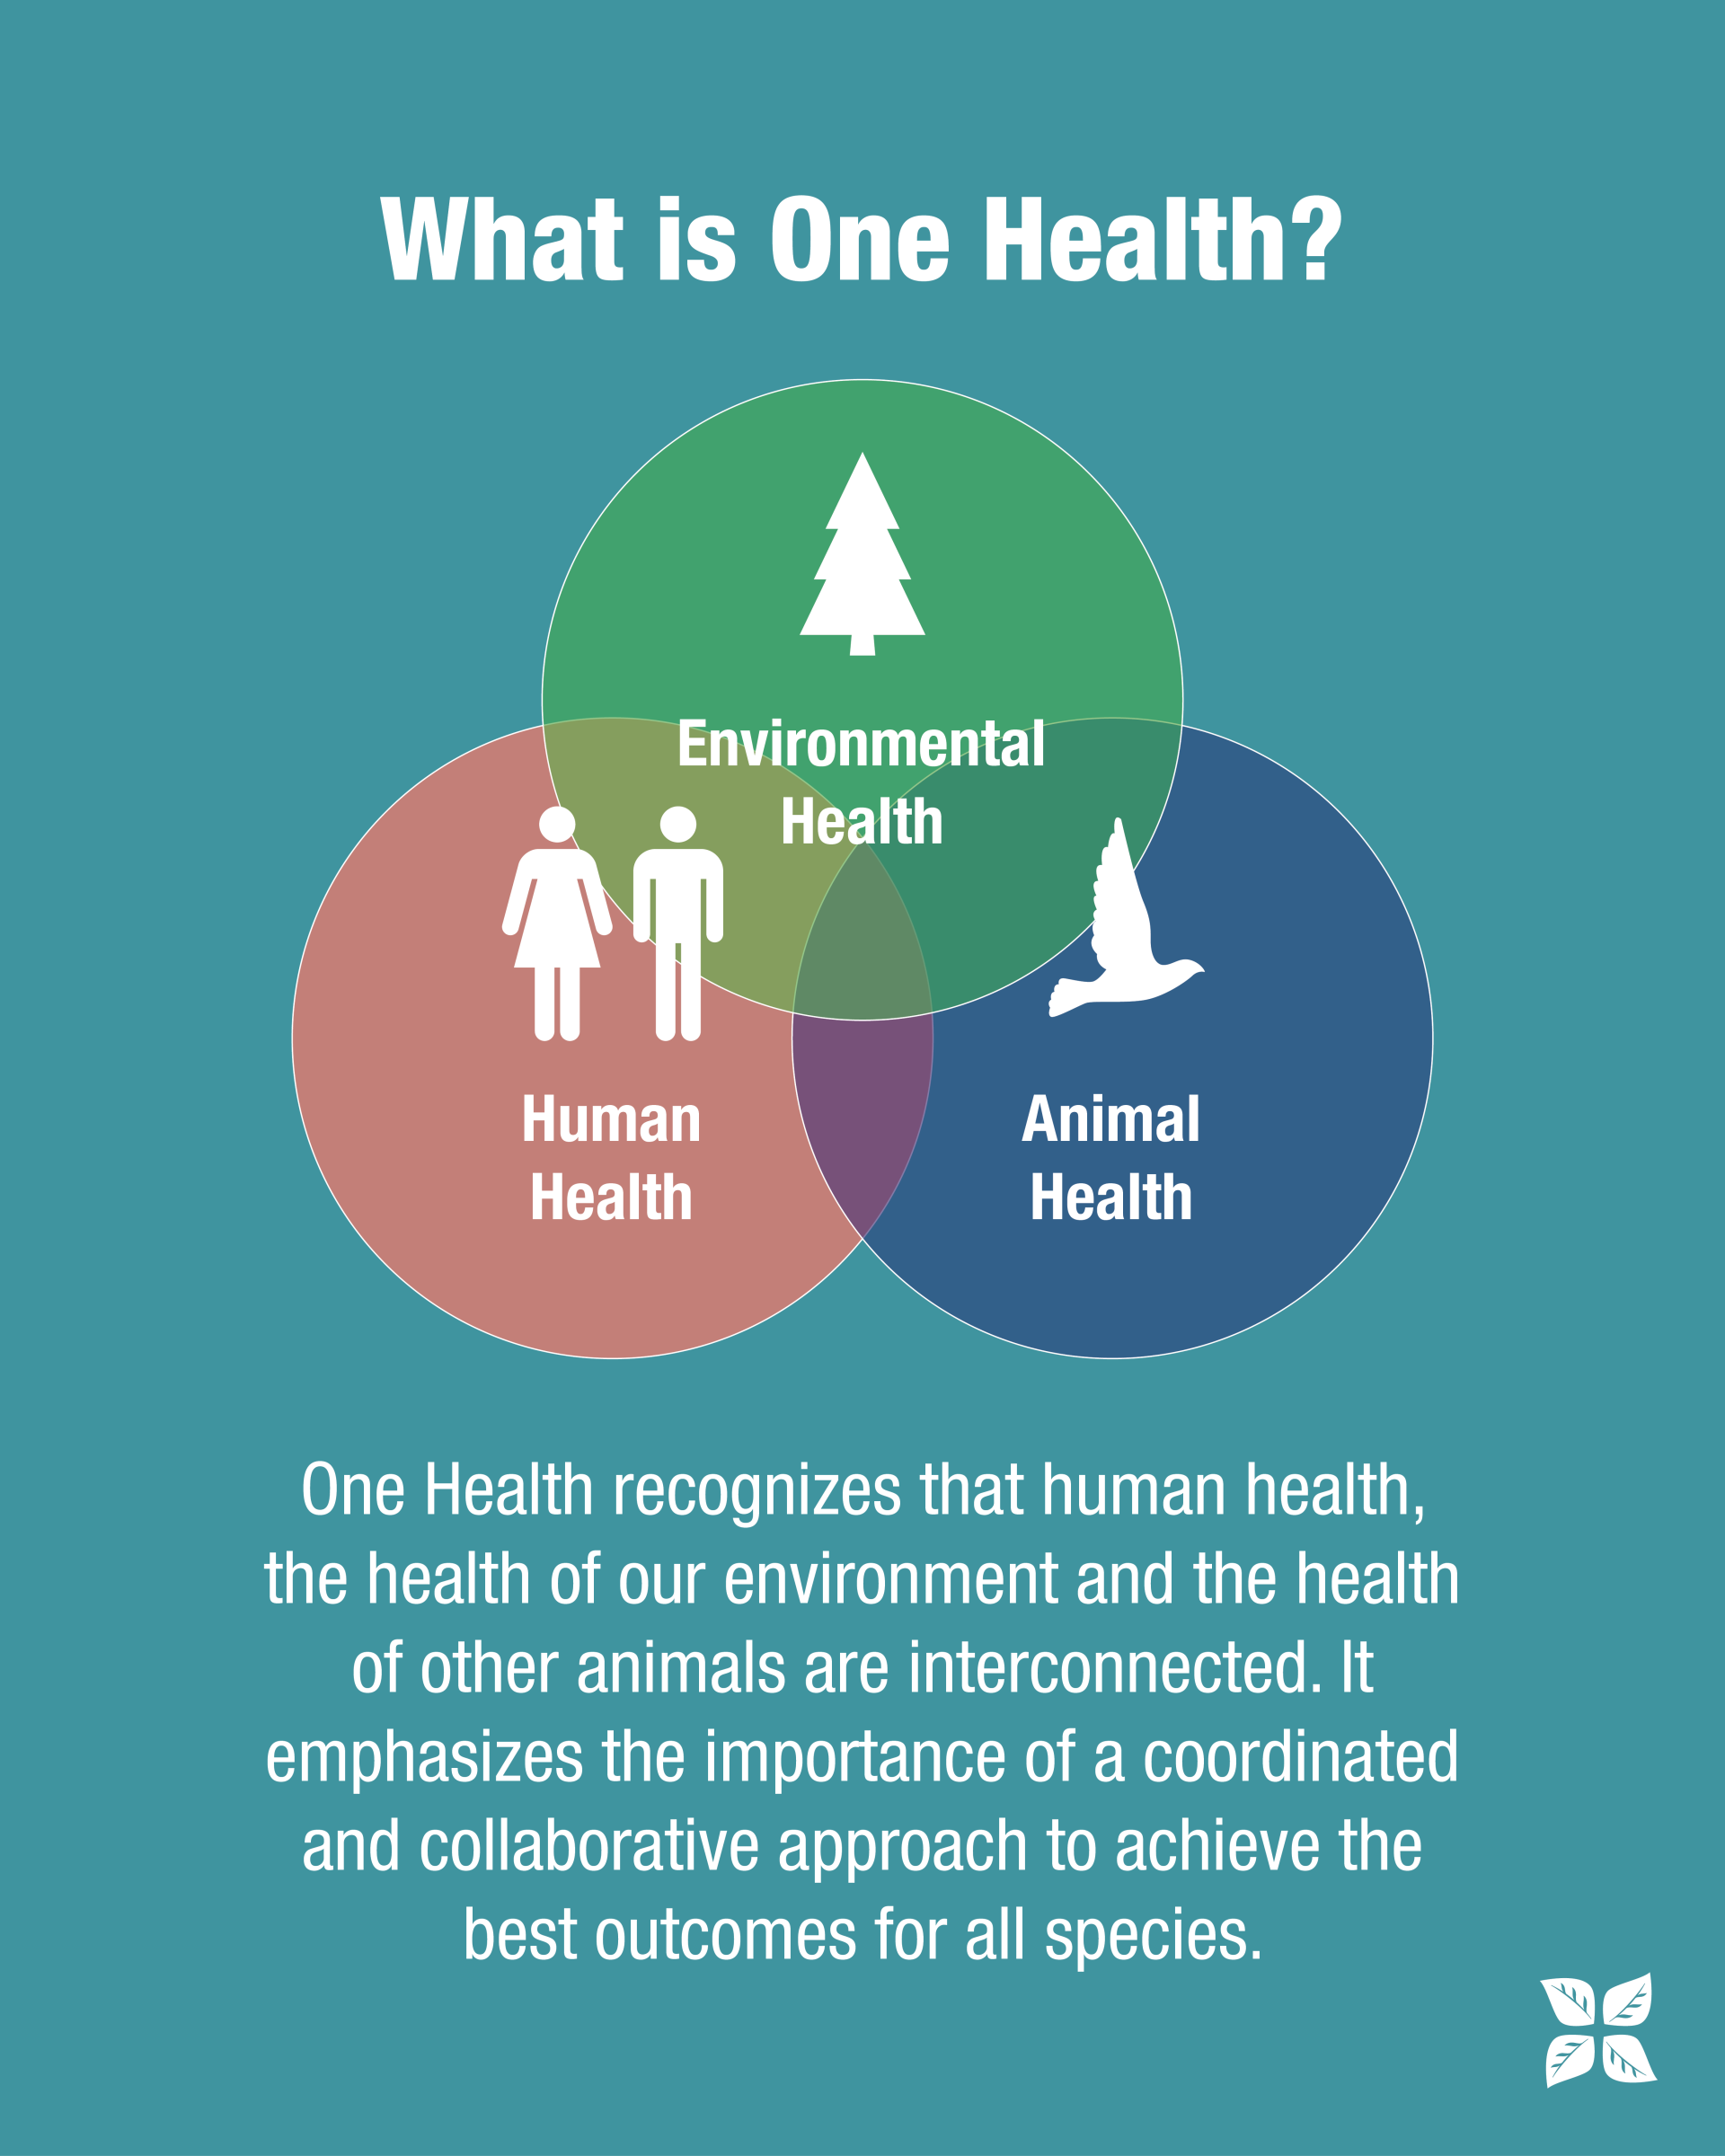 What is One Health? Environmental Health, Human Health, Animal Health. One Health recognizes that human health, the health of our environment and the health of other animals are interconnected. It emphasizes the importance of a coordinated and collaborative approach to achieve the best outcomes for all species.